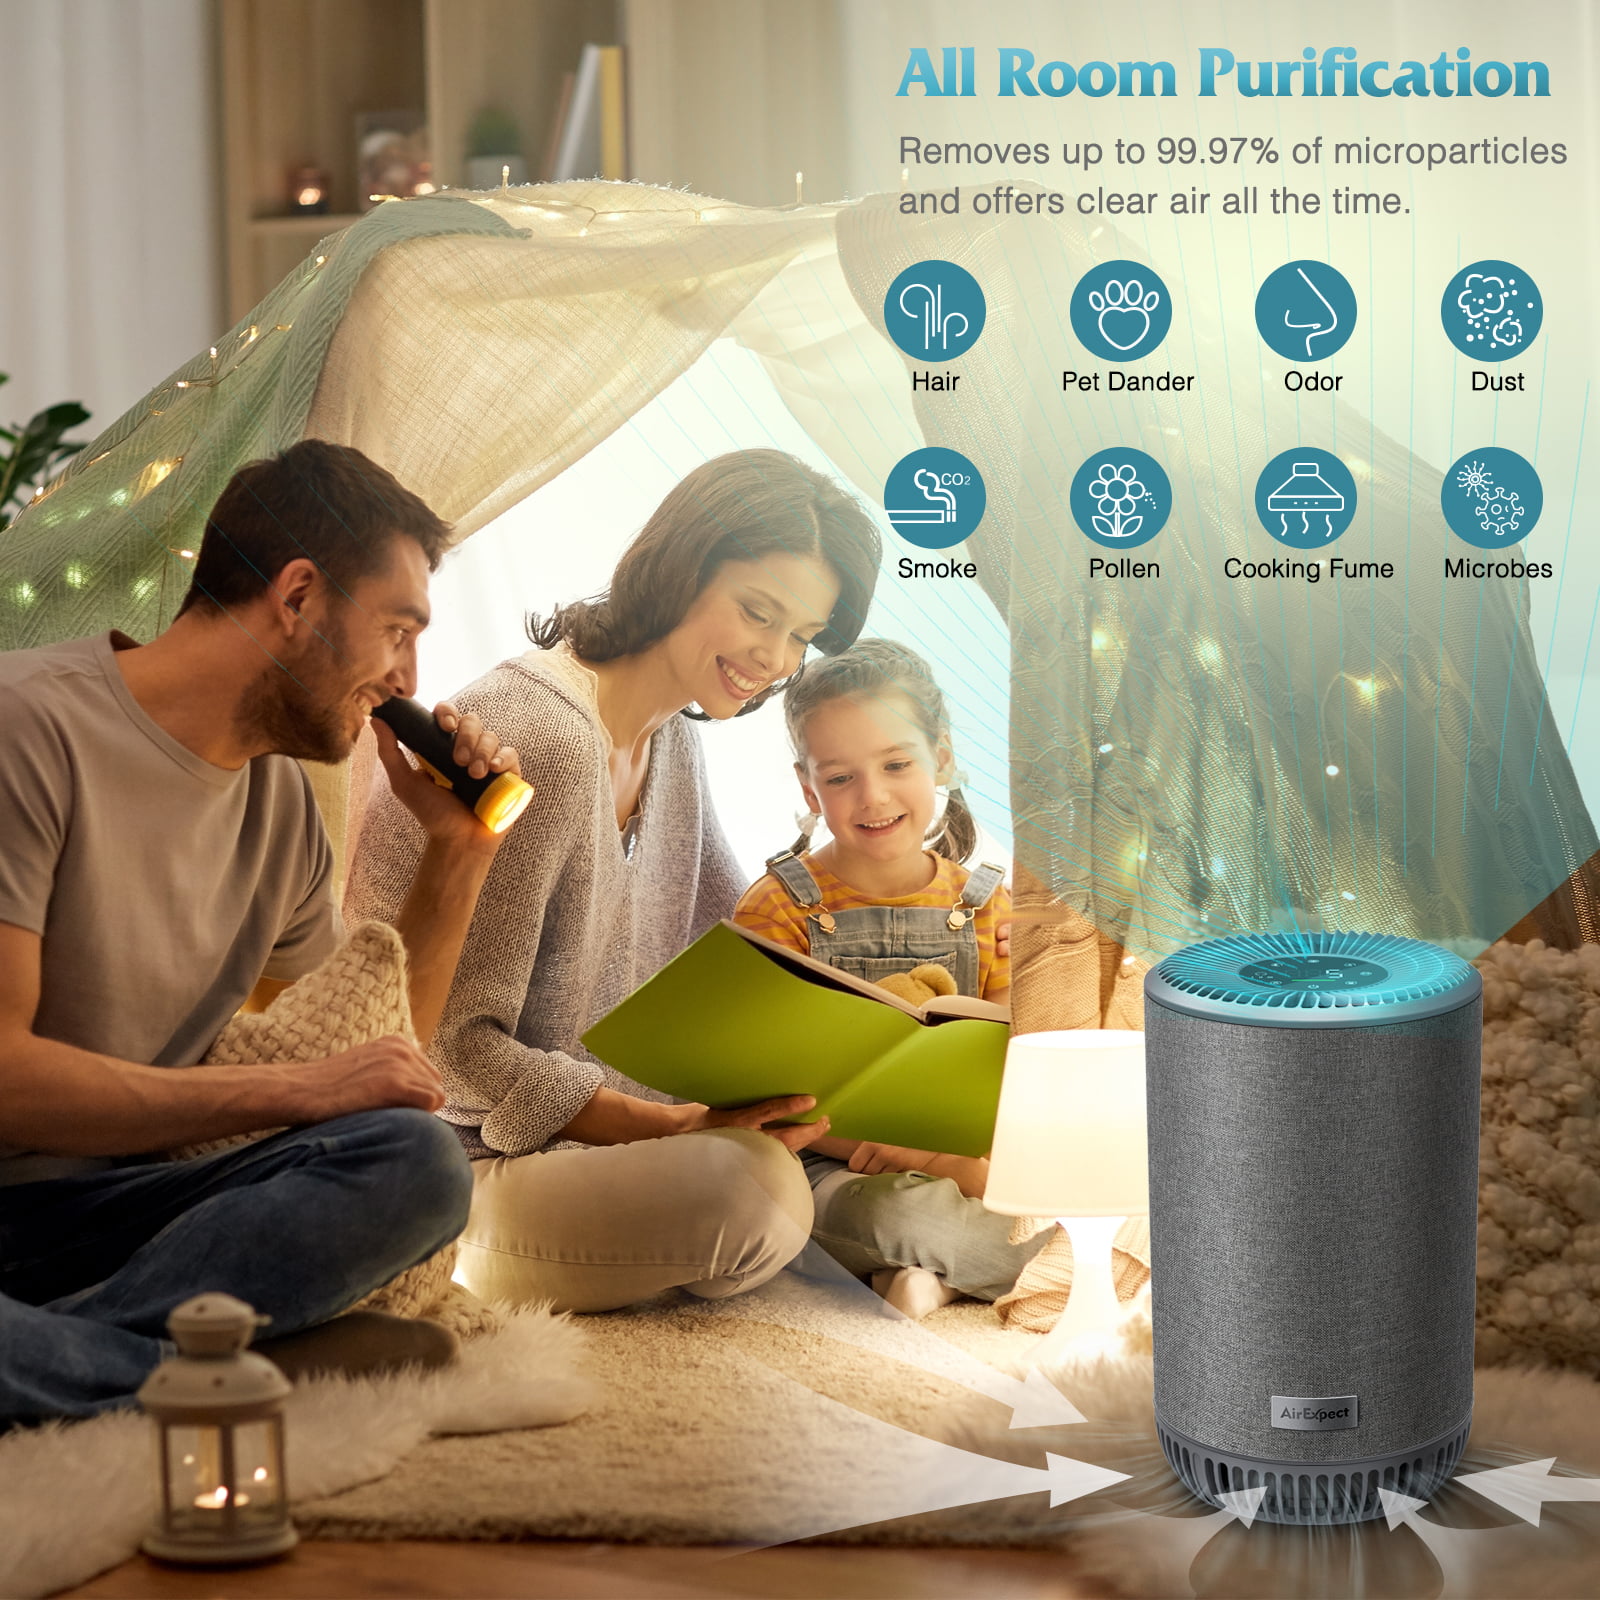 20m³/Hour Powerful Air Cleaner Compact Dust Remover Air Purifier with HEPA Filter Low Noise Air Purifiers for Home Bedroom with Nightlight & Ioniser